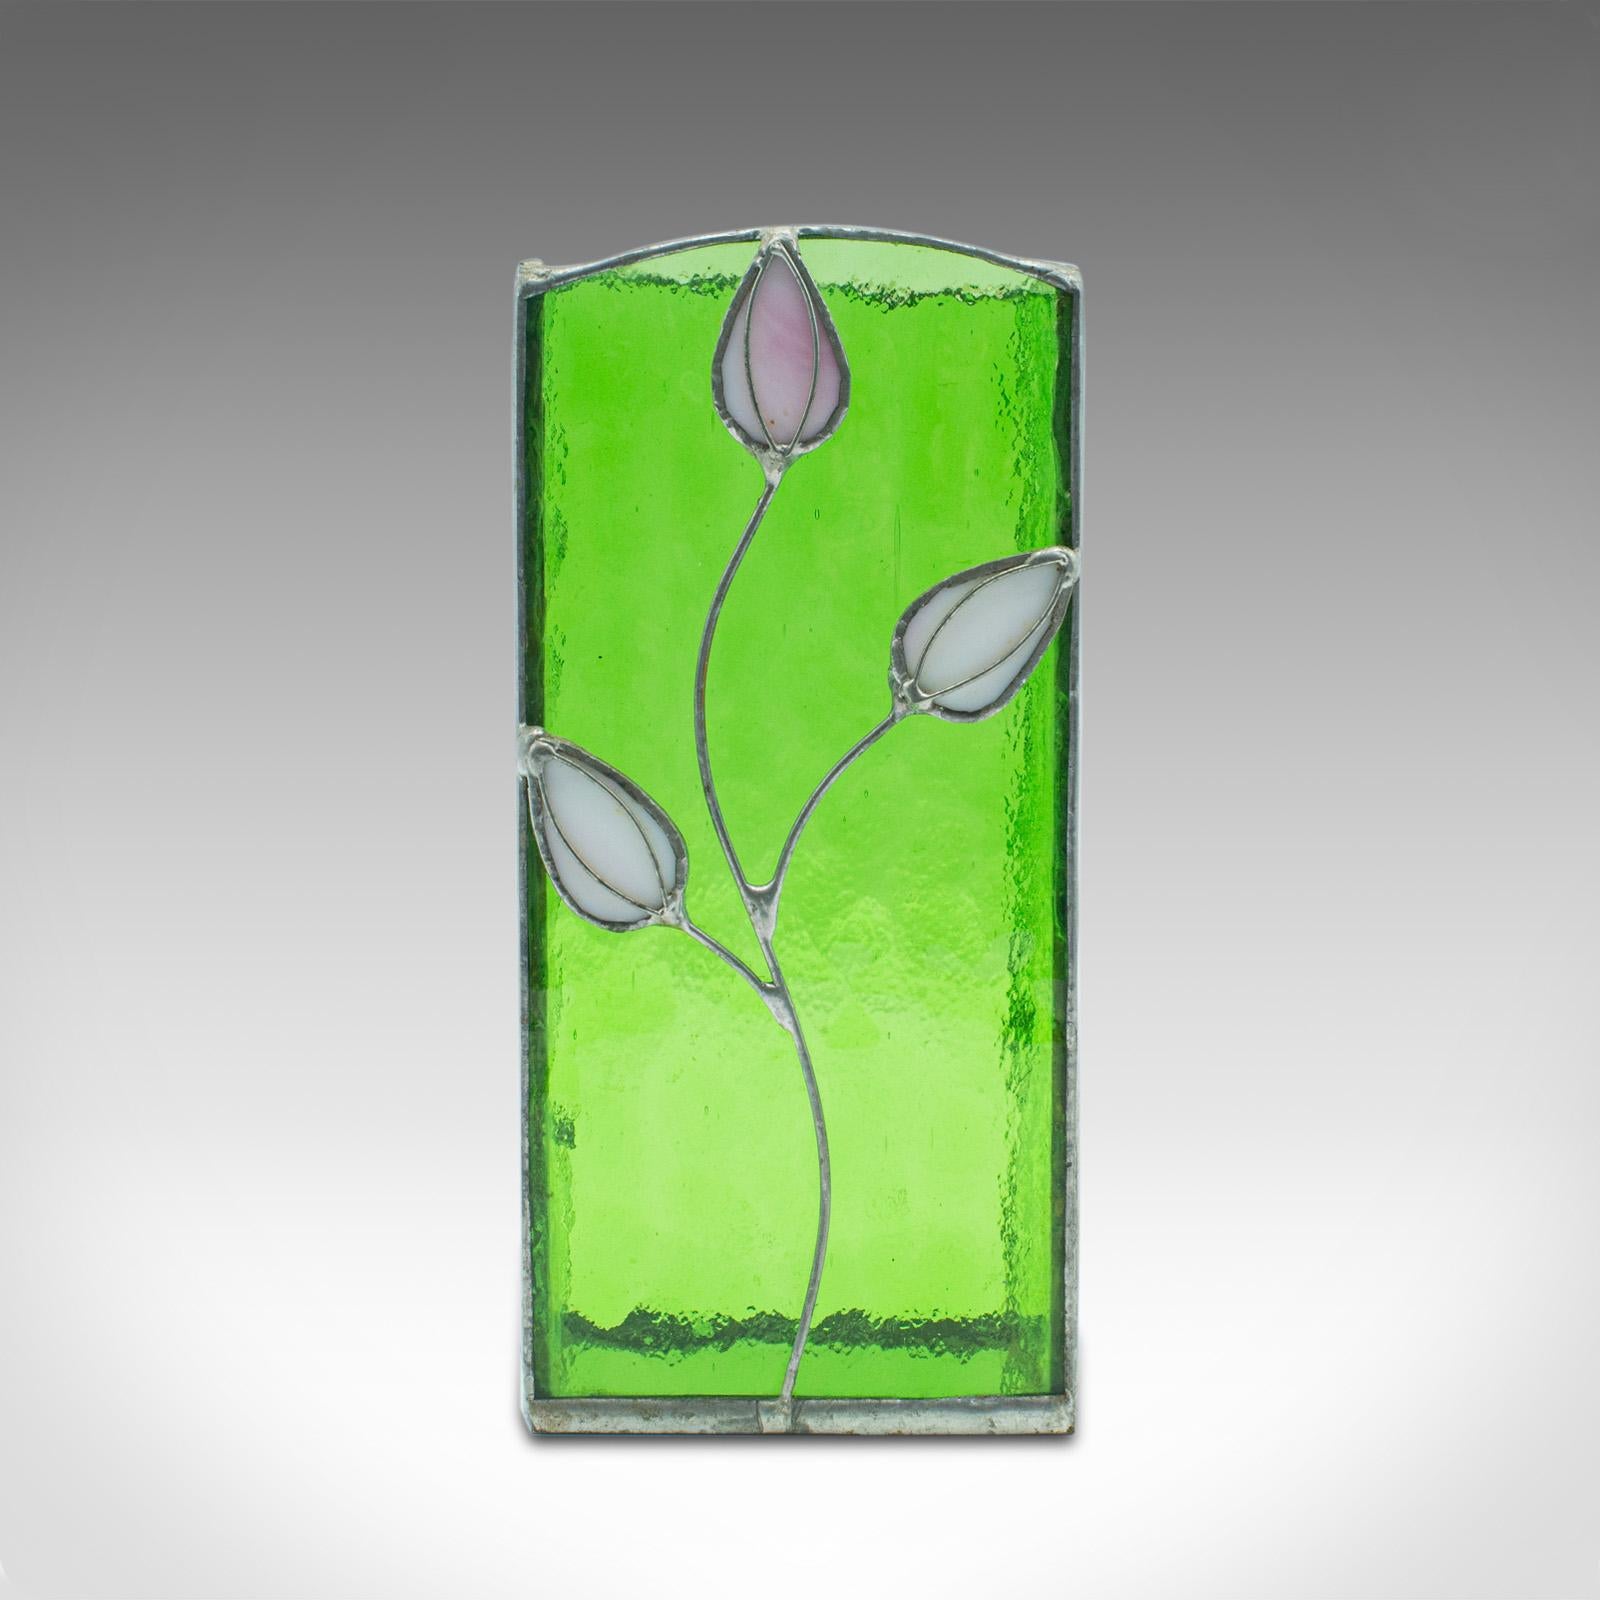 This is an antique slip vase. An English, glass and lead flower pot with Art Nouveau taste, dating to the Edwardian period, circa 1910.

Striking green glass with delightful foliate decoration.
Displays a desirable aged patina